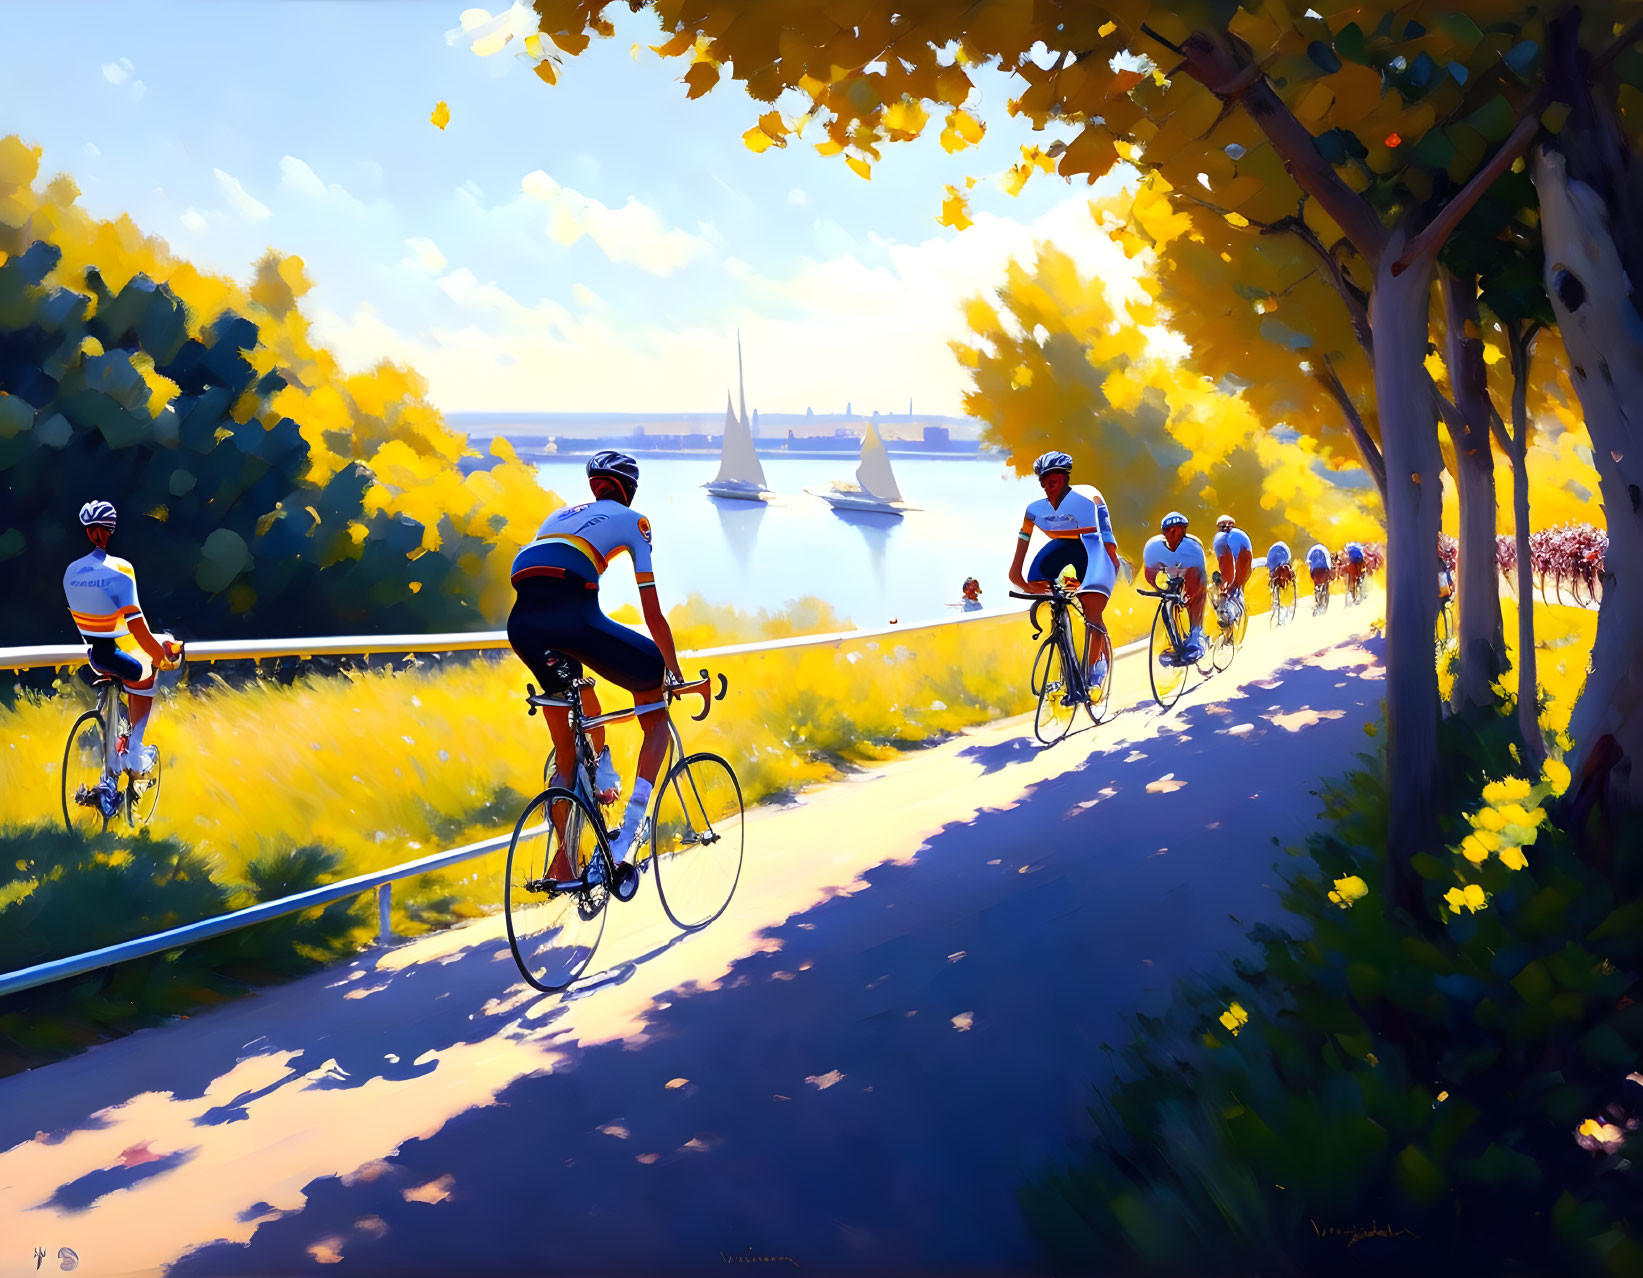 Cyclists on Sunny Path with Sailboats and Flowers